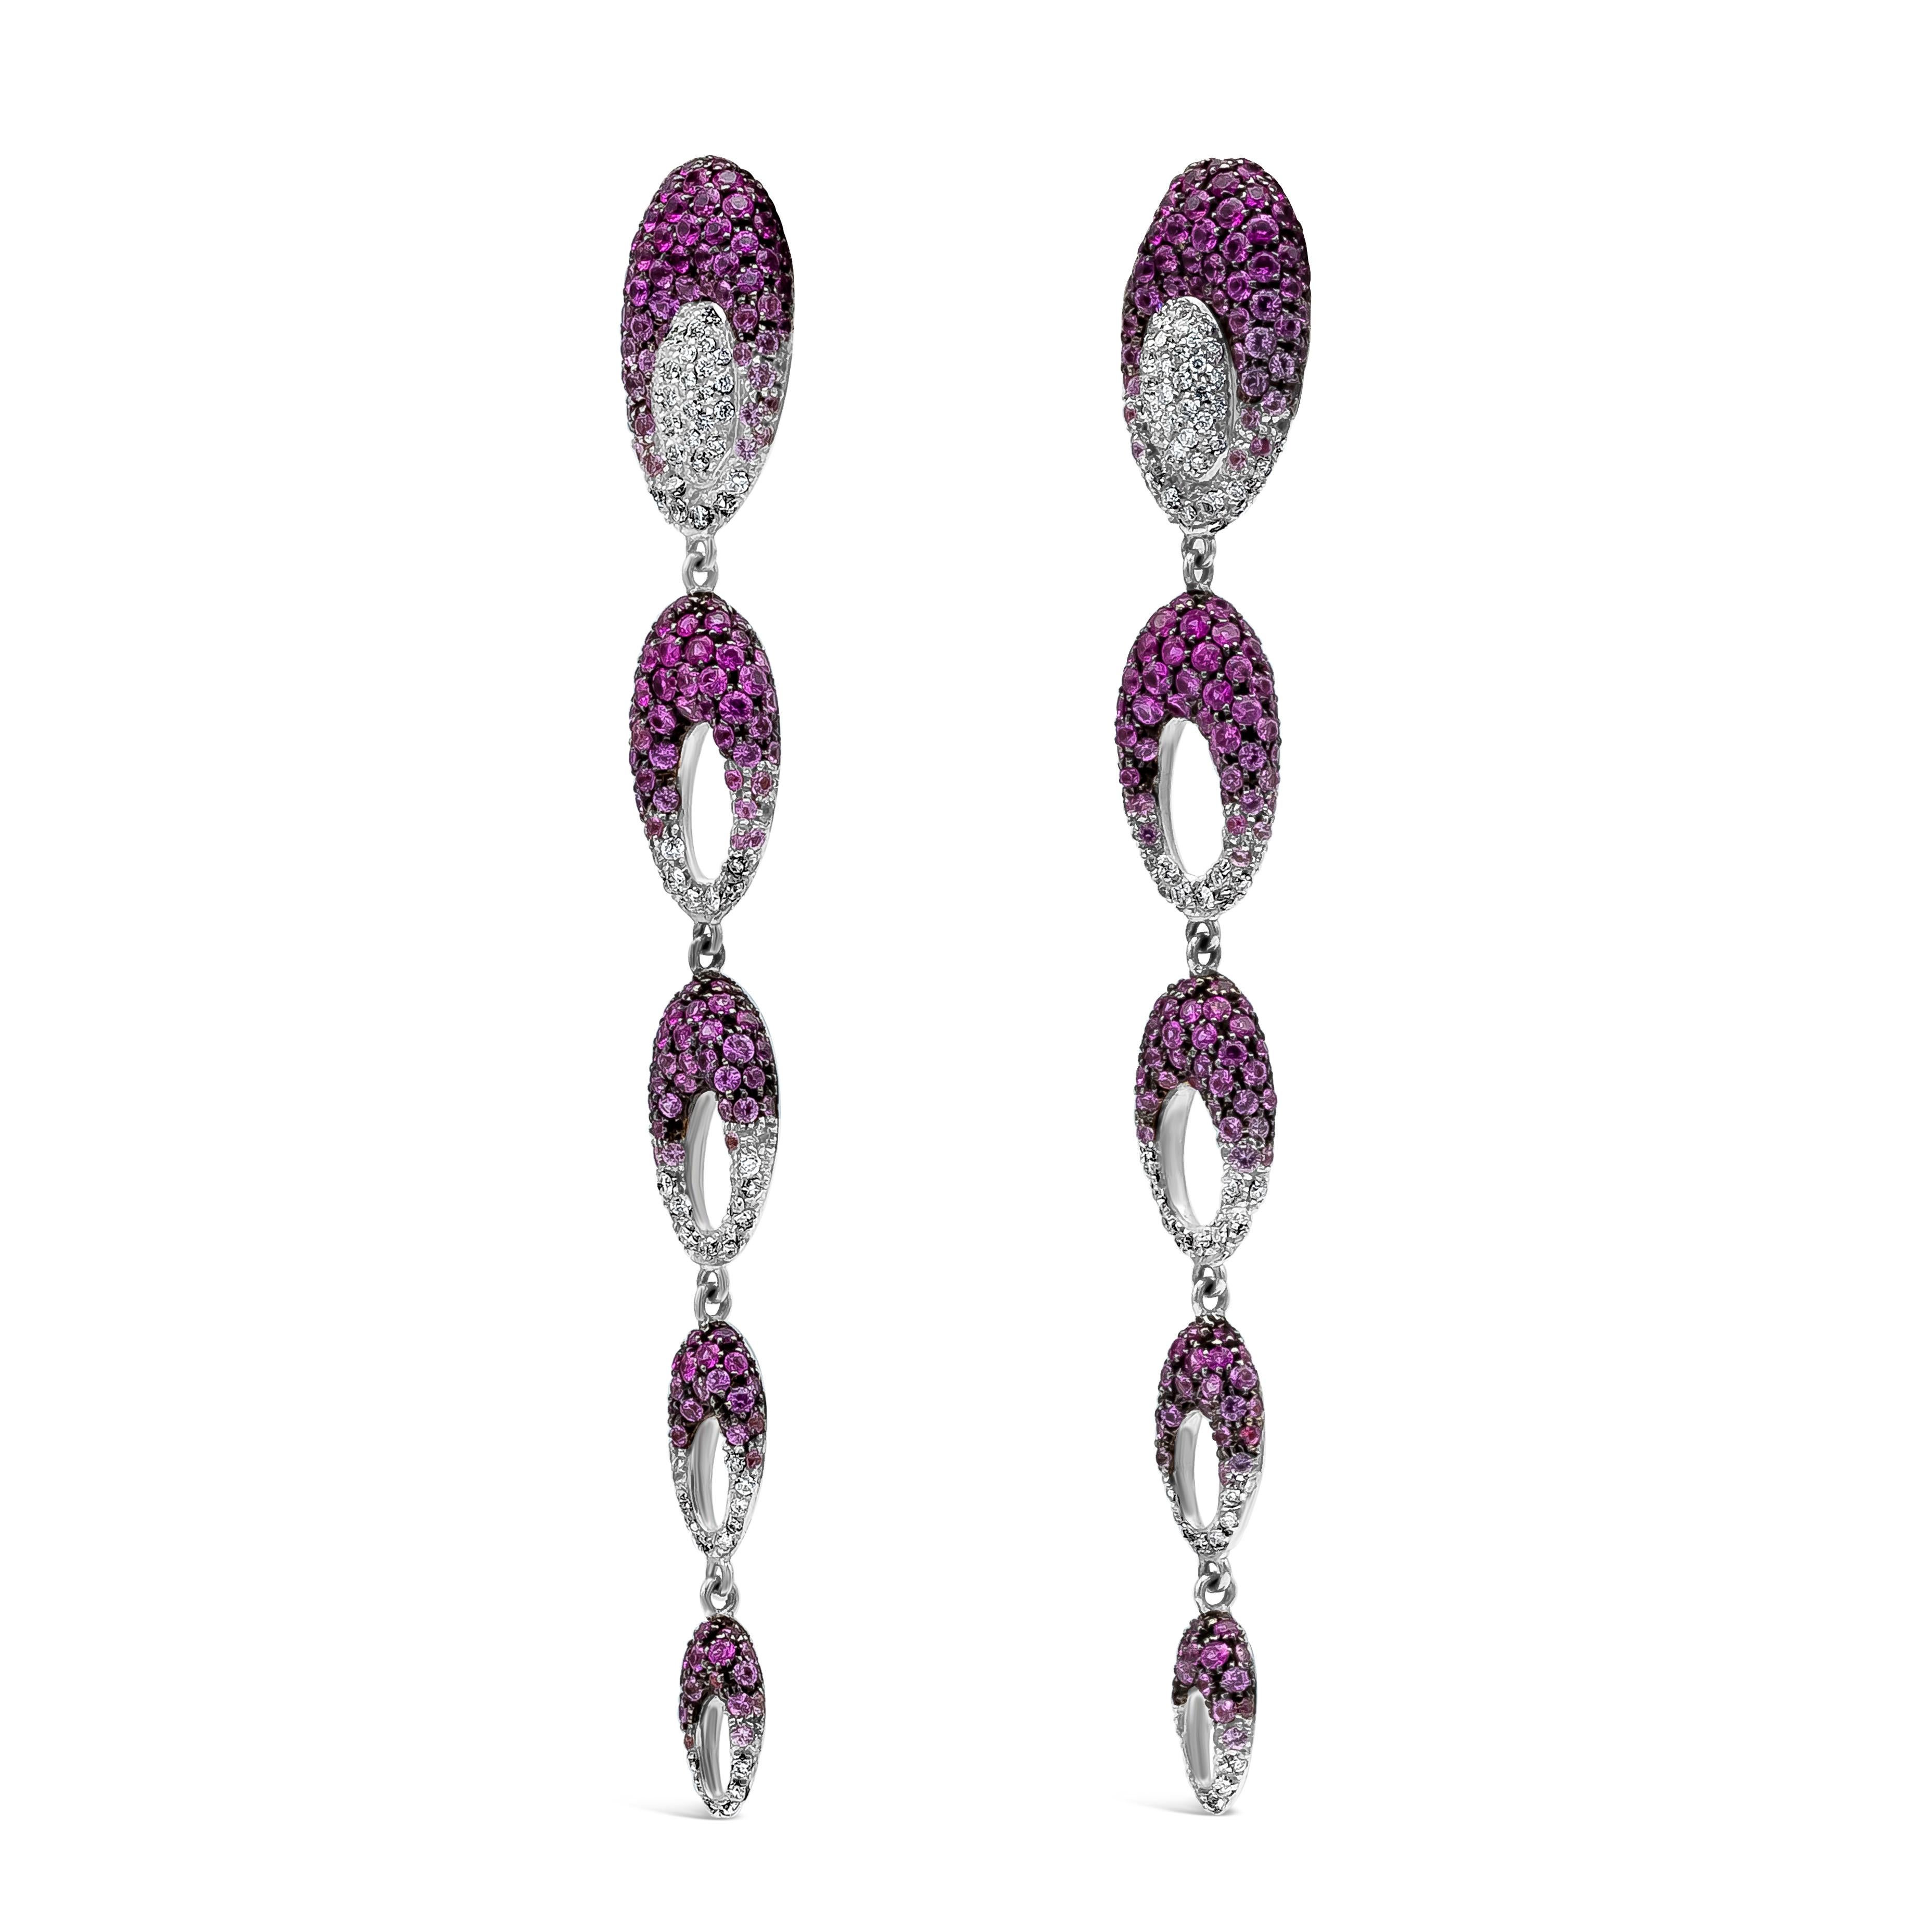 An exquisite and elegant fashion drop earrings featuring purplish-pink sapphire weighing 8.83 carats total, and round white diamonds weighing 4.01 carats, F Color and VS in Clarity. Showcasing five circle open work, in a beautiful ombre from